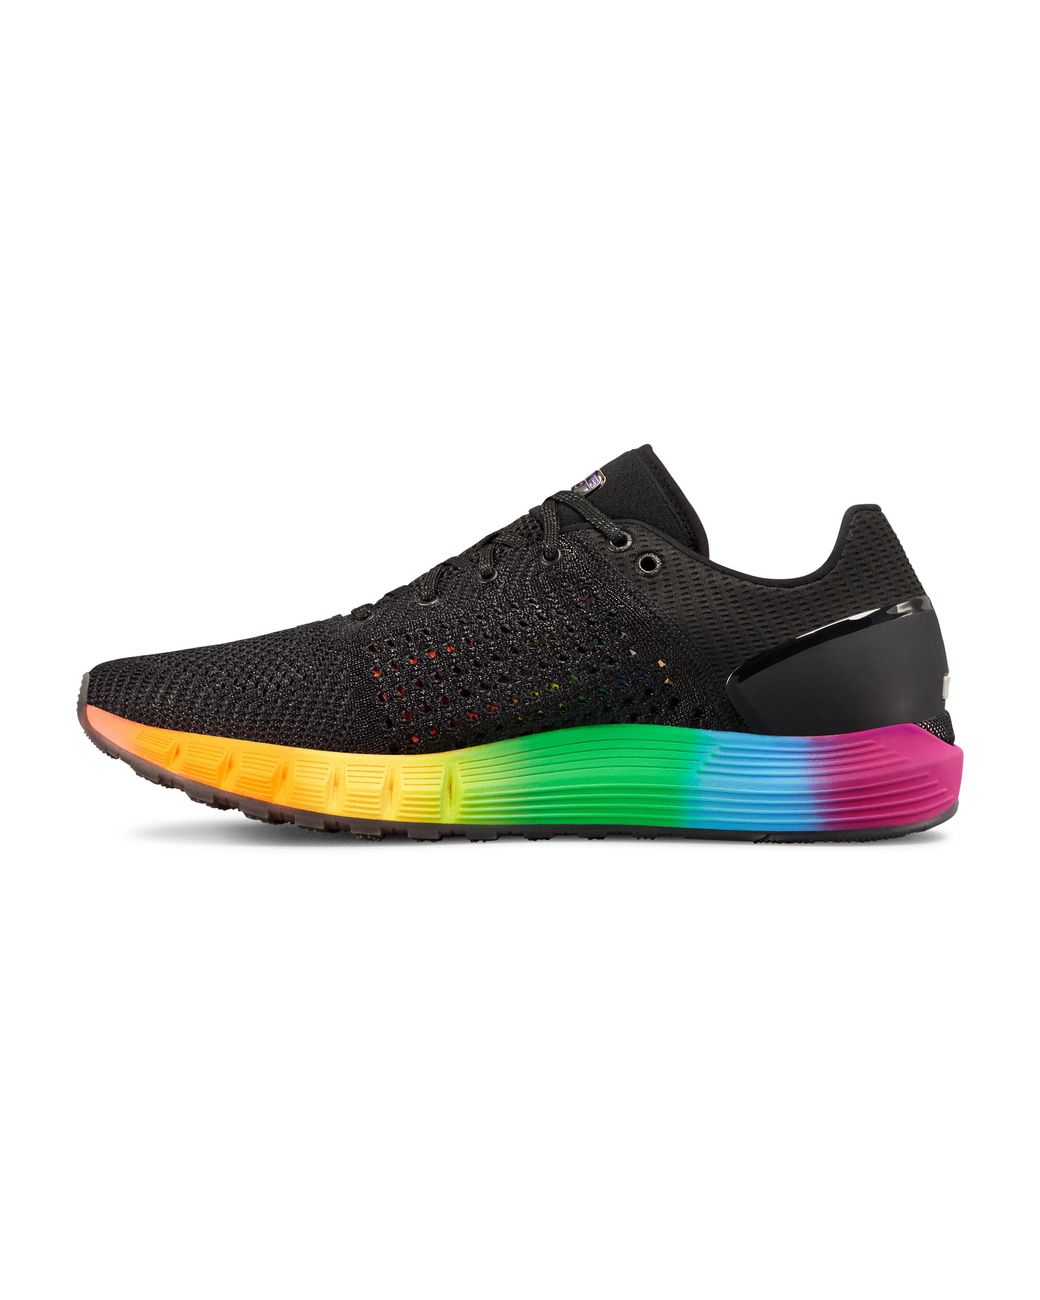 Under Armour HOVR Sonic Pride Rainbow Black Womens 7.5 Running Shoes  Bluetooth